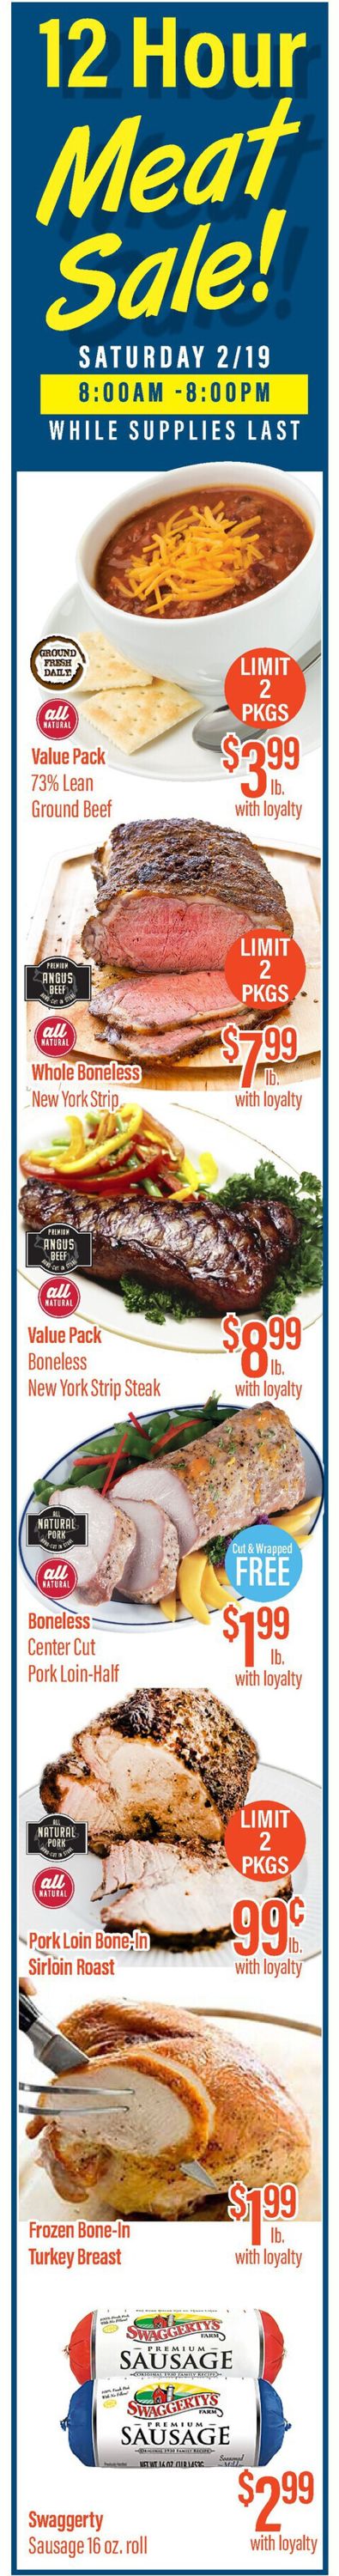 Remke Markets Ad from 02/17/2022